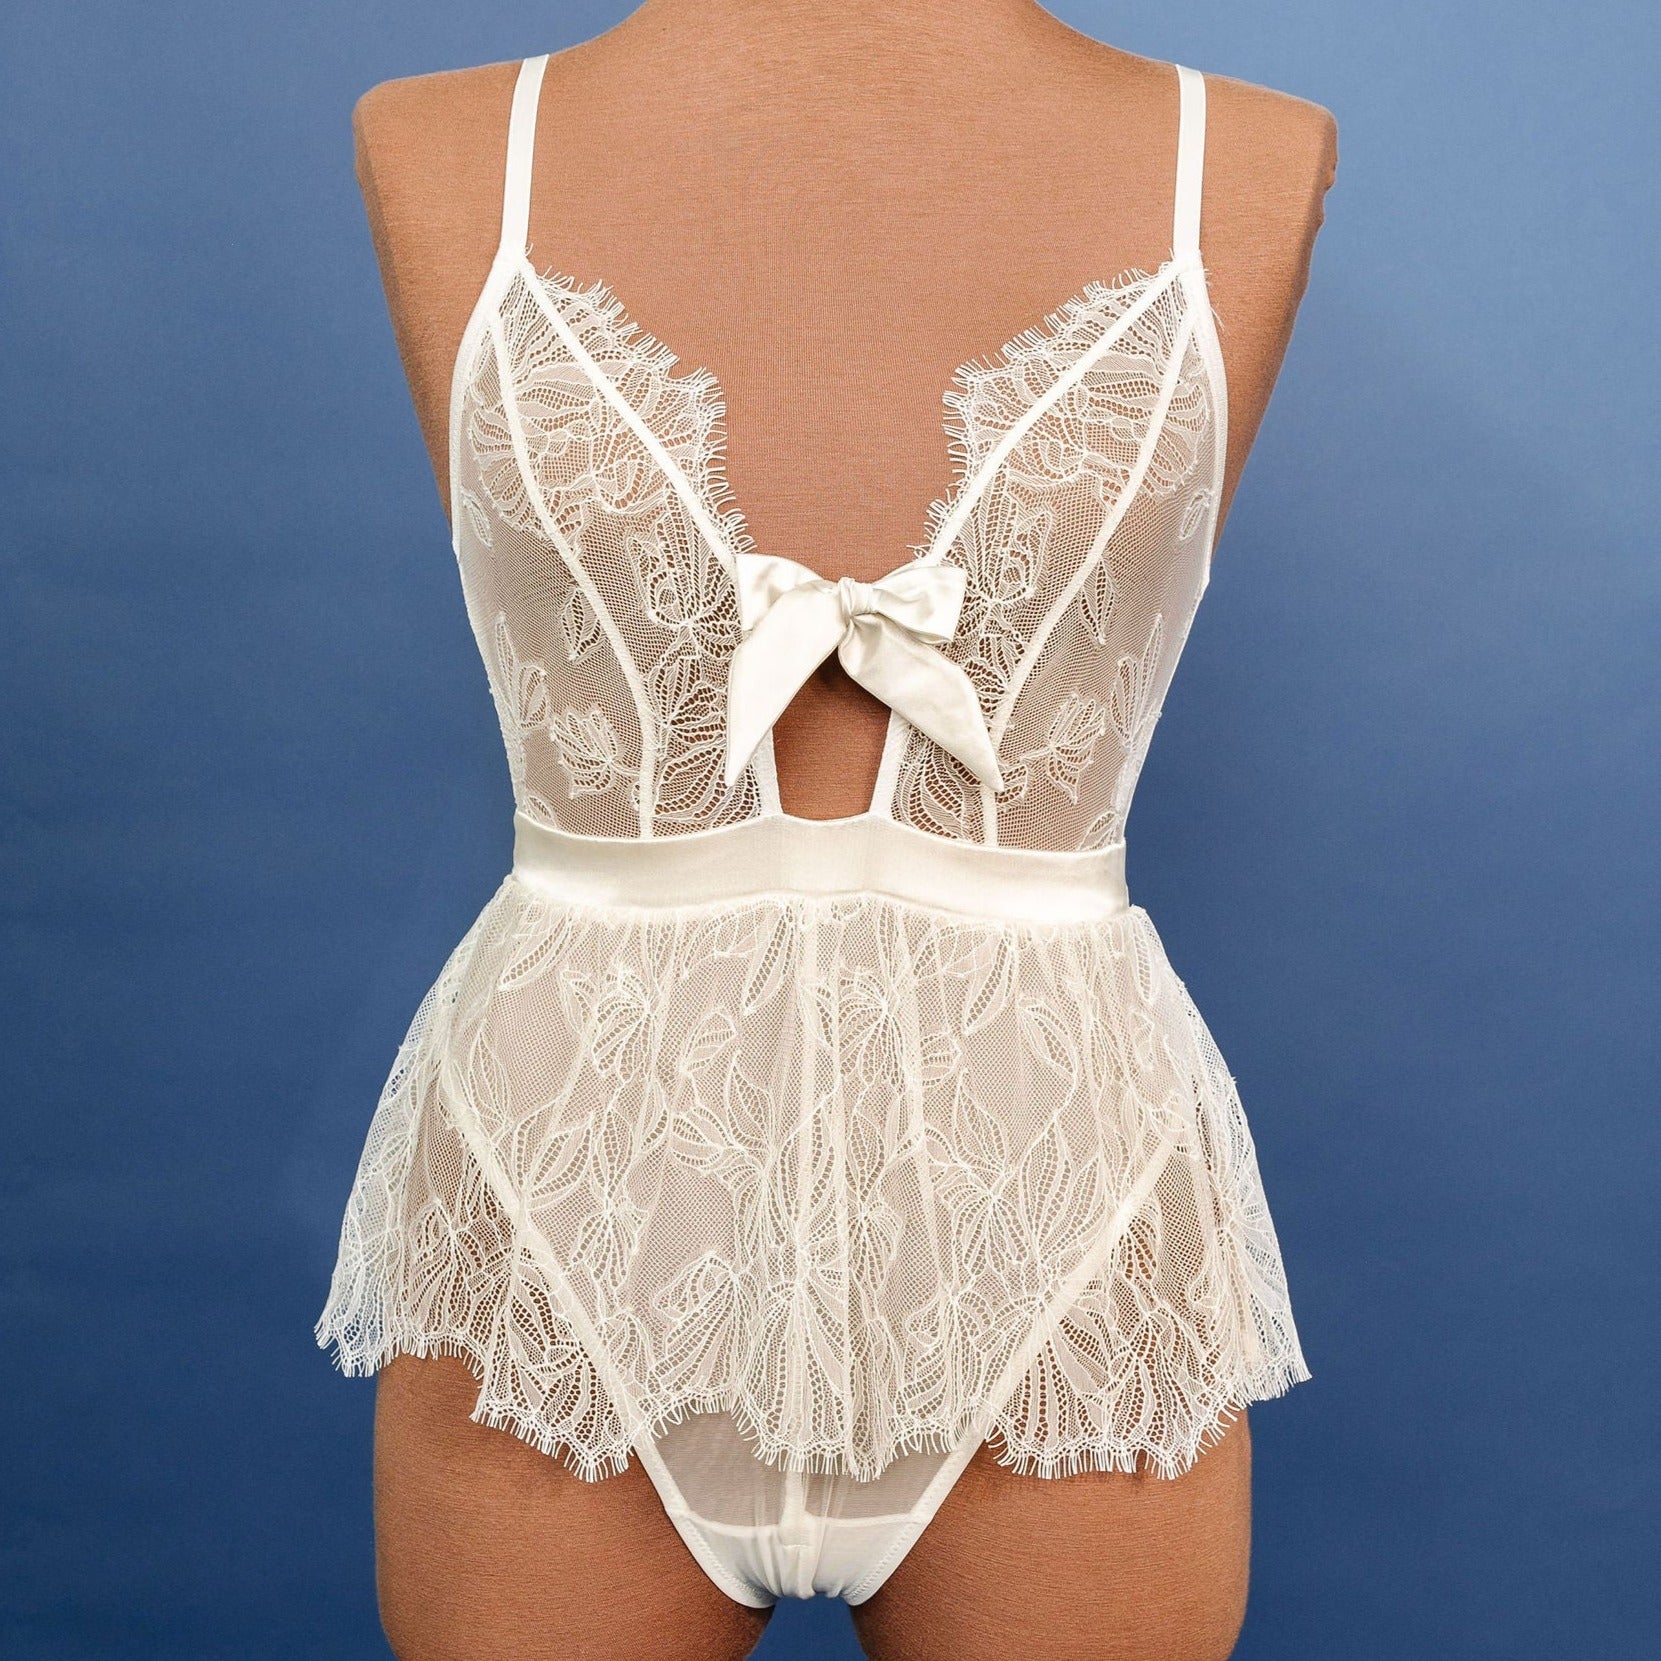 Eyelash Lace Crotchless Teddy - Cream by Mentionables